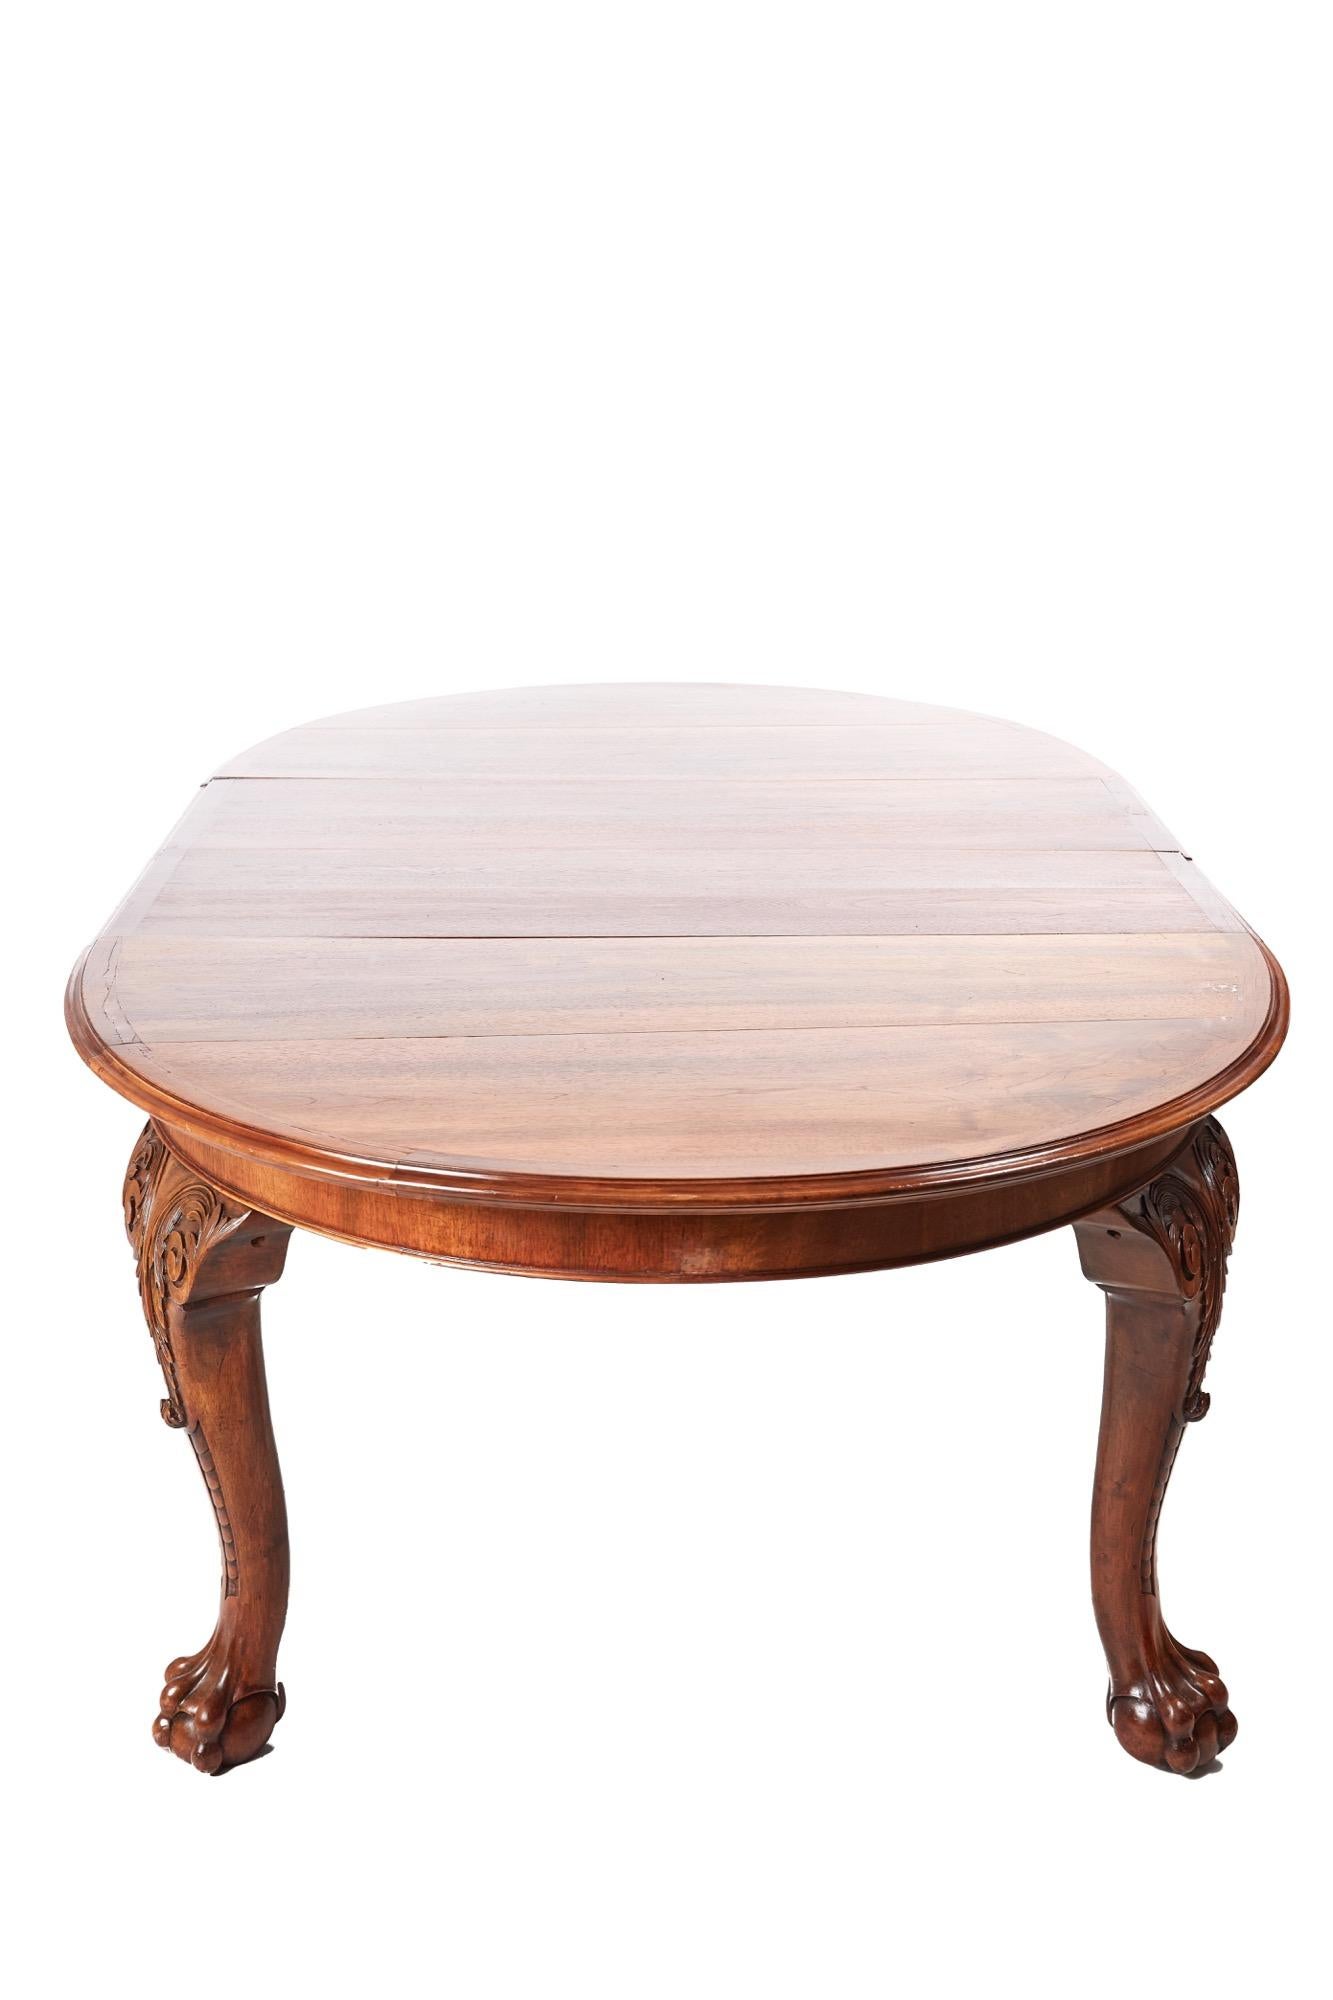 This is a fantastic 19th century Victorian antique walnut extending dining table with a splendid walnut cross-banded top having a moulded edge. It has two large extra leaves and features a winding mechanism with original winding handle. It stands on